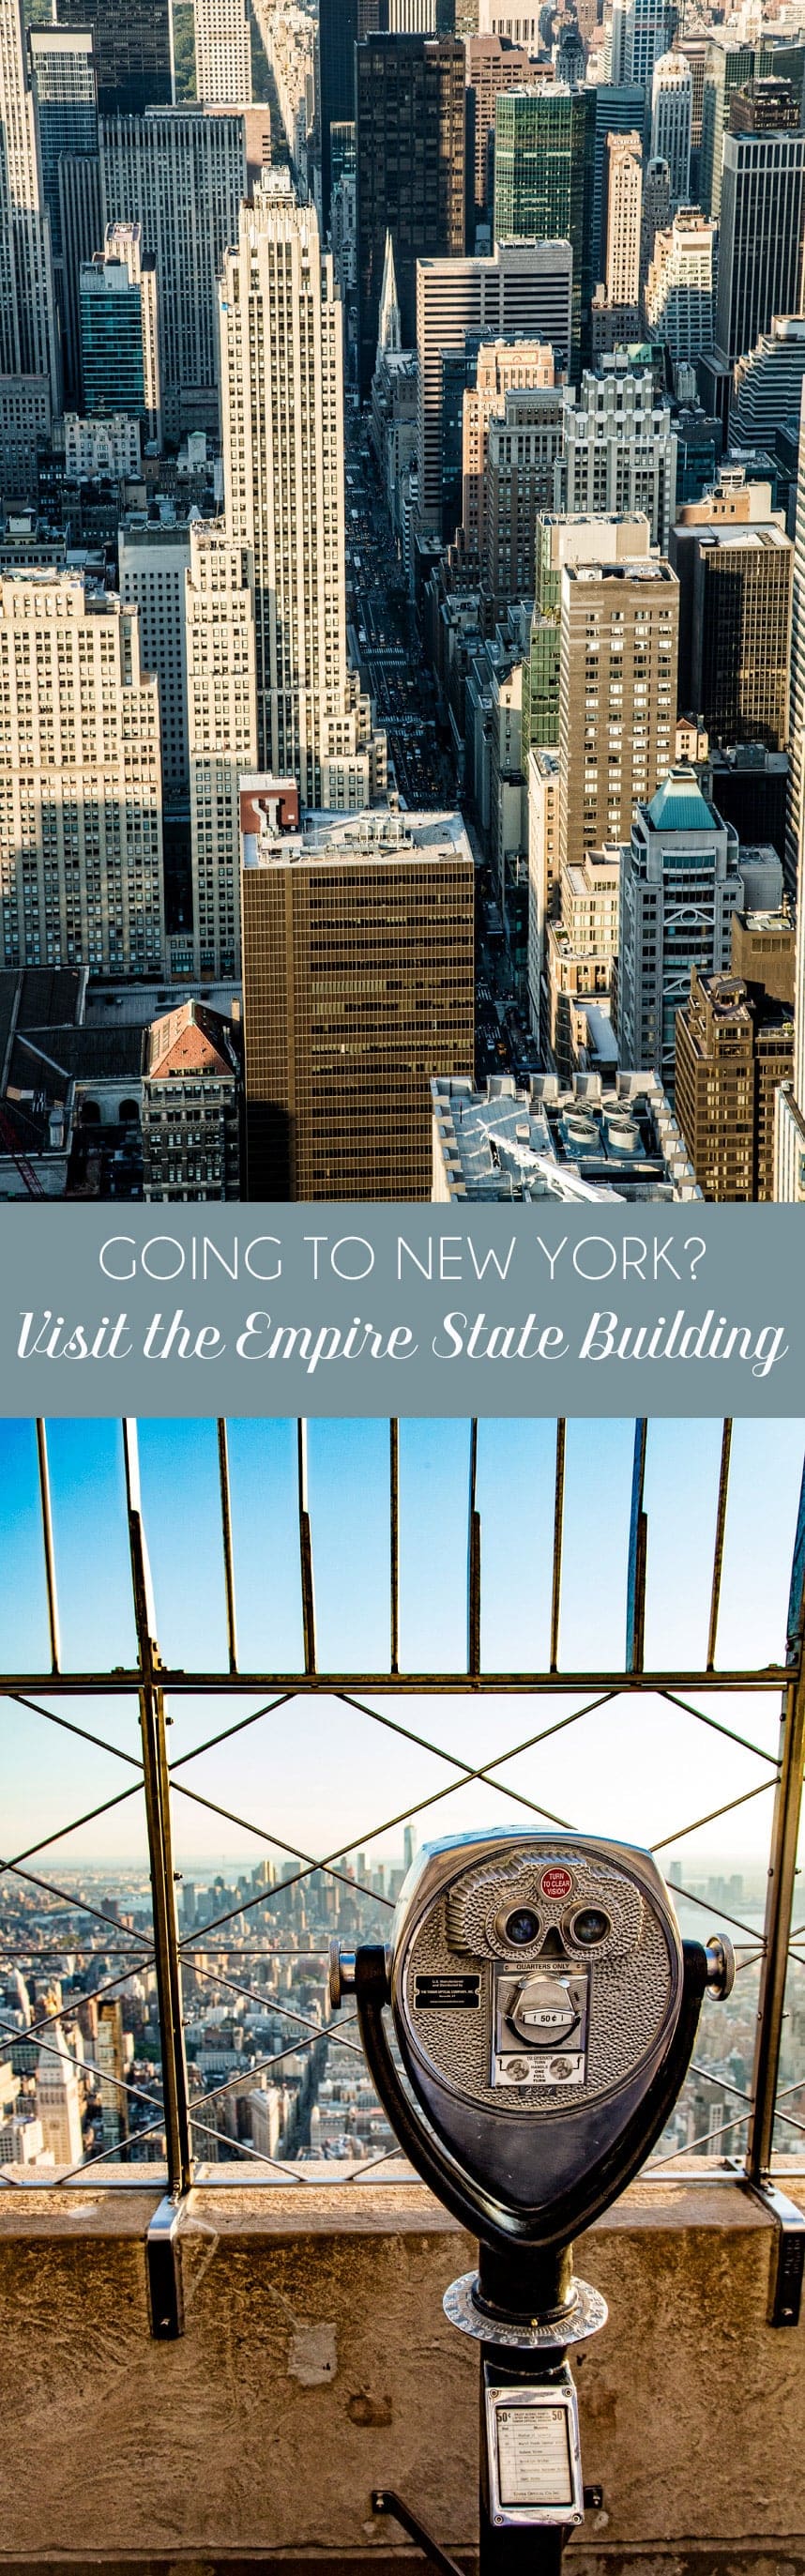 Going to New York? You Need to Visit the Empire State Building Observatory